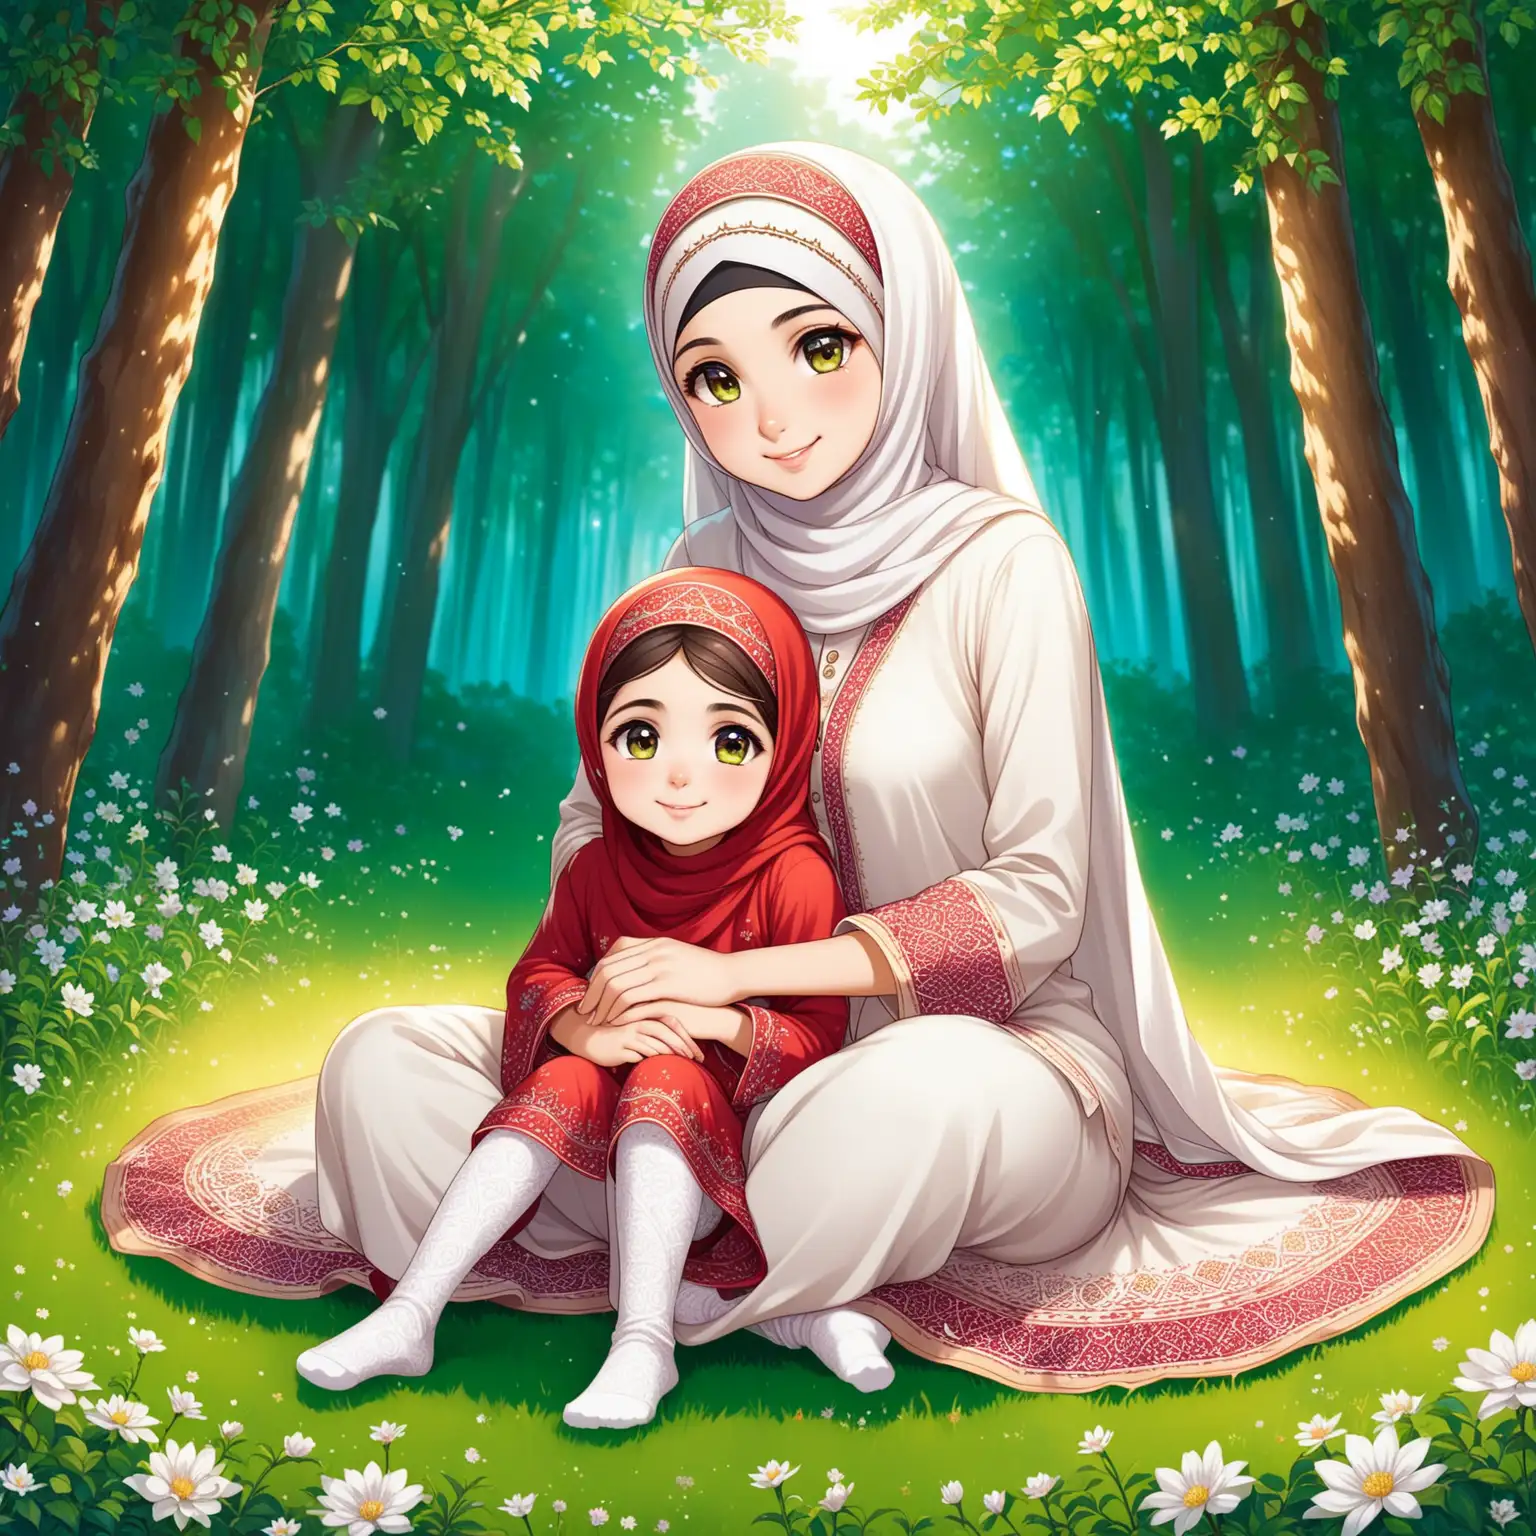 Character 8 years old Persian girl(full height, Muslim, with emphasis no hair out of veil(Hijab), smaller eyes, bigger nose, white skin, cute, smiling, wearing socks, clothes full of Persian designs) named Fatemeh.
Mother of Fatemeh's name is Roqayeh, Roqayeh is wearing loose shirt.
Fatemeh is sitting with her mother Roqayeh politely regarding.

Atmosphere forest, grass flowers, etc...